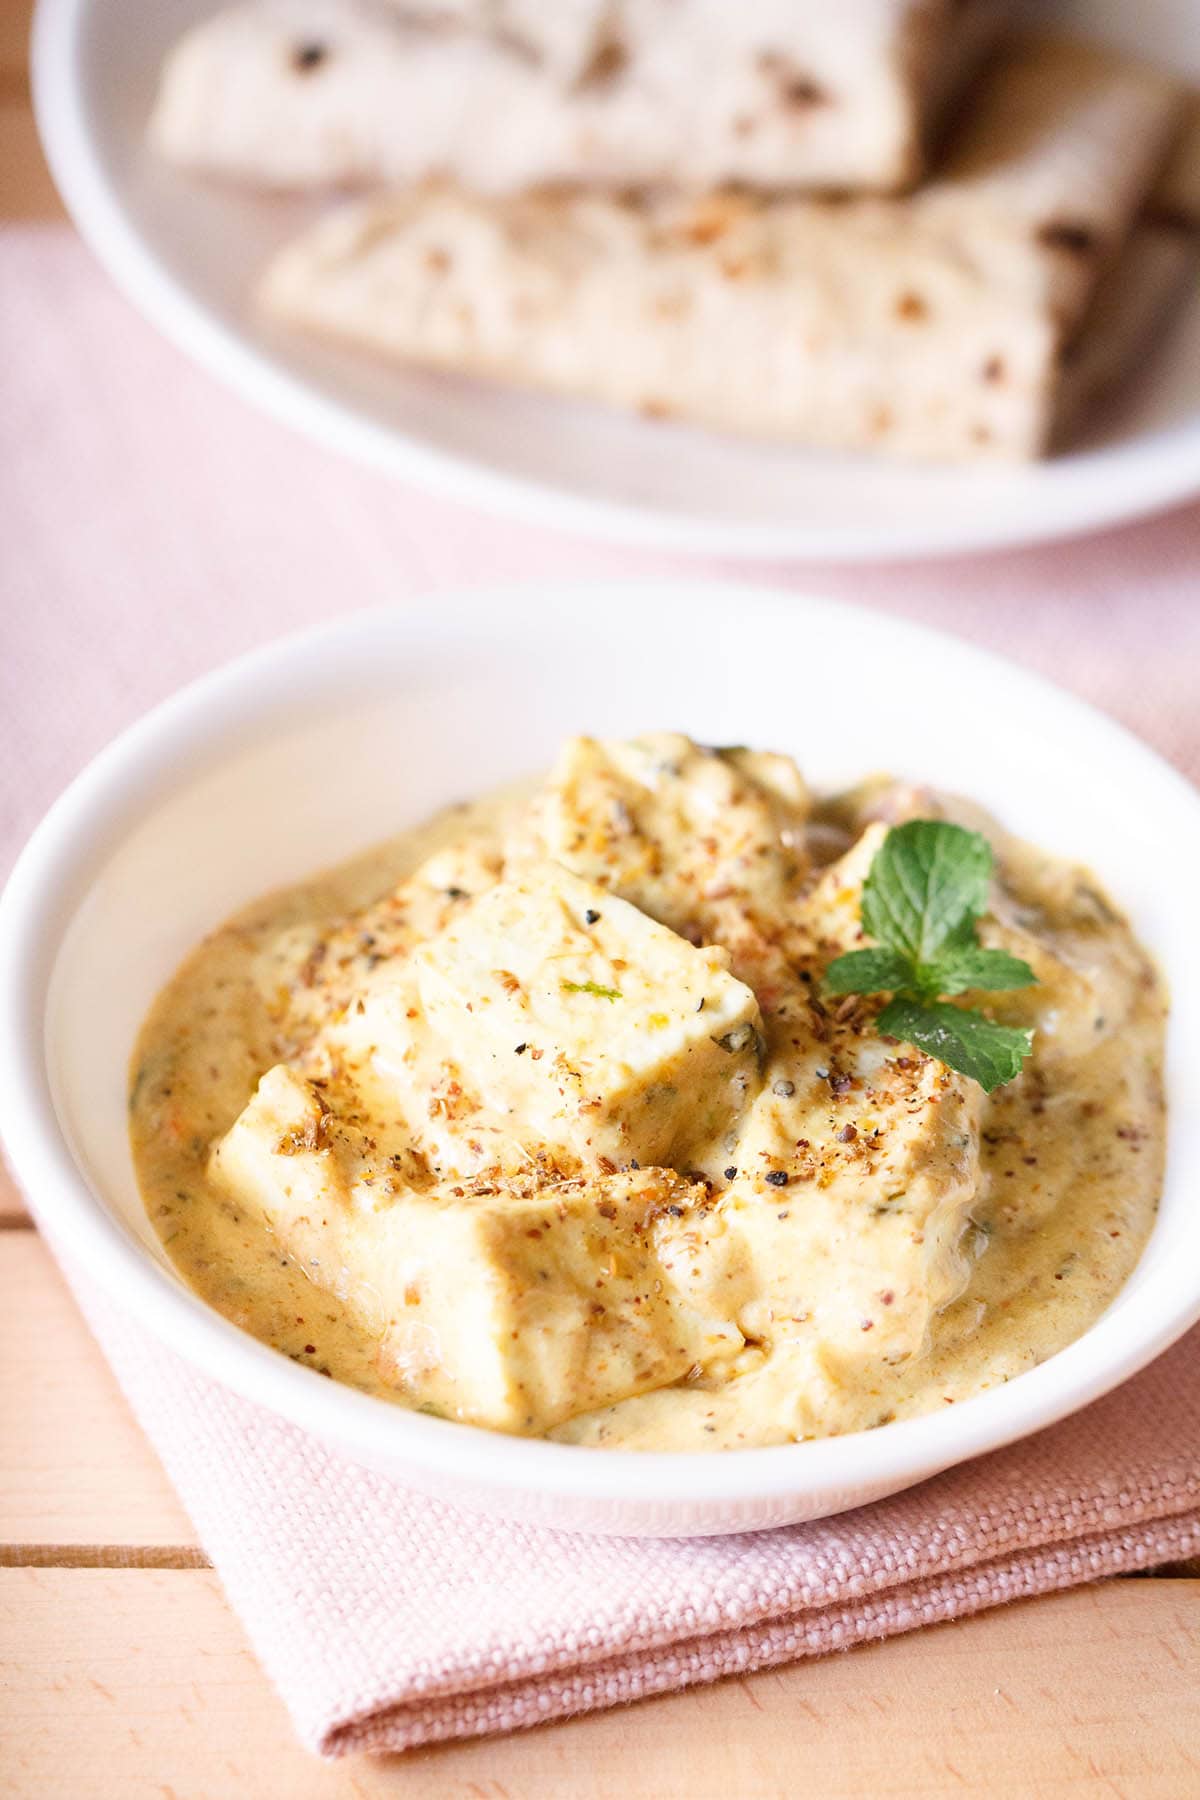 achari paneer in a white bowl garnished with a mint sprig on a light pink napkin with a plate of folded rotis above